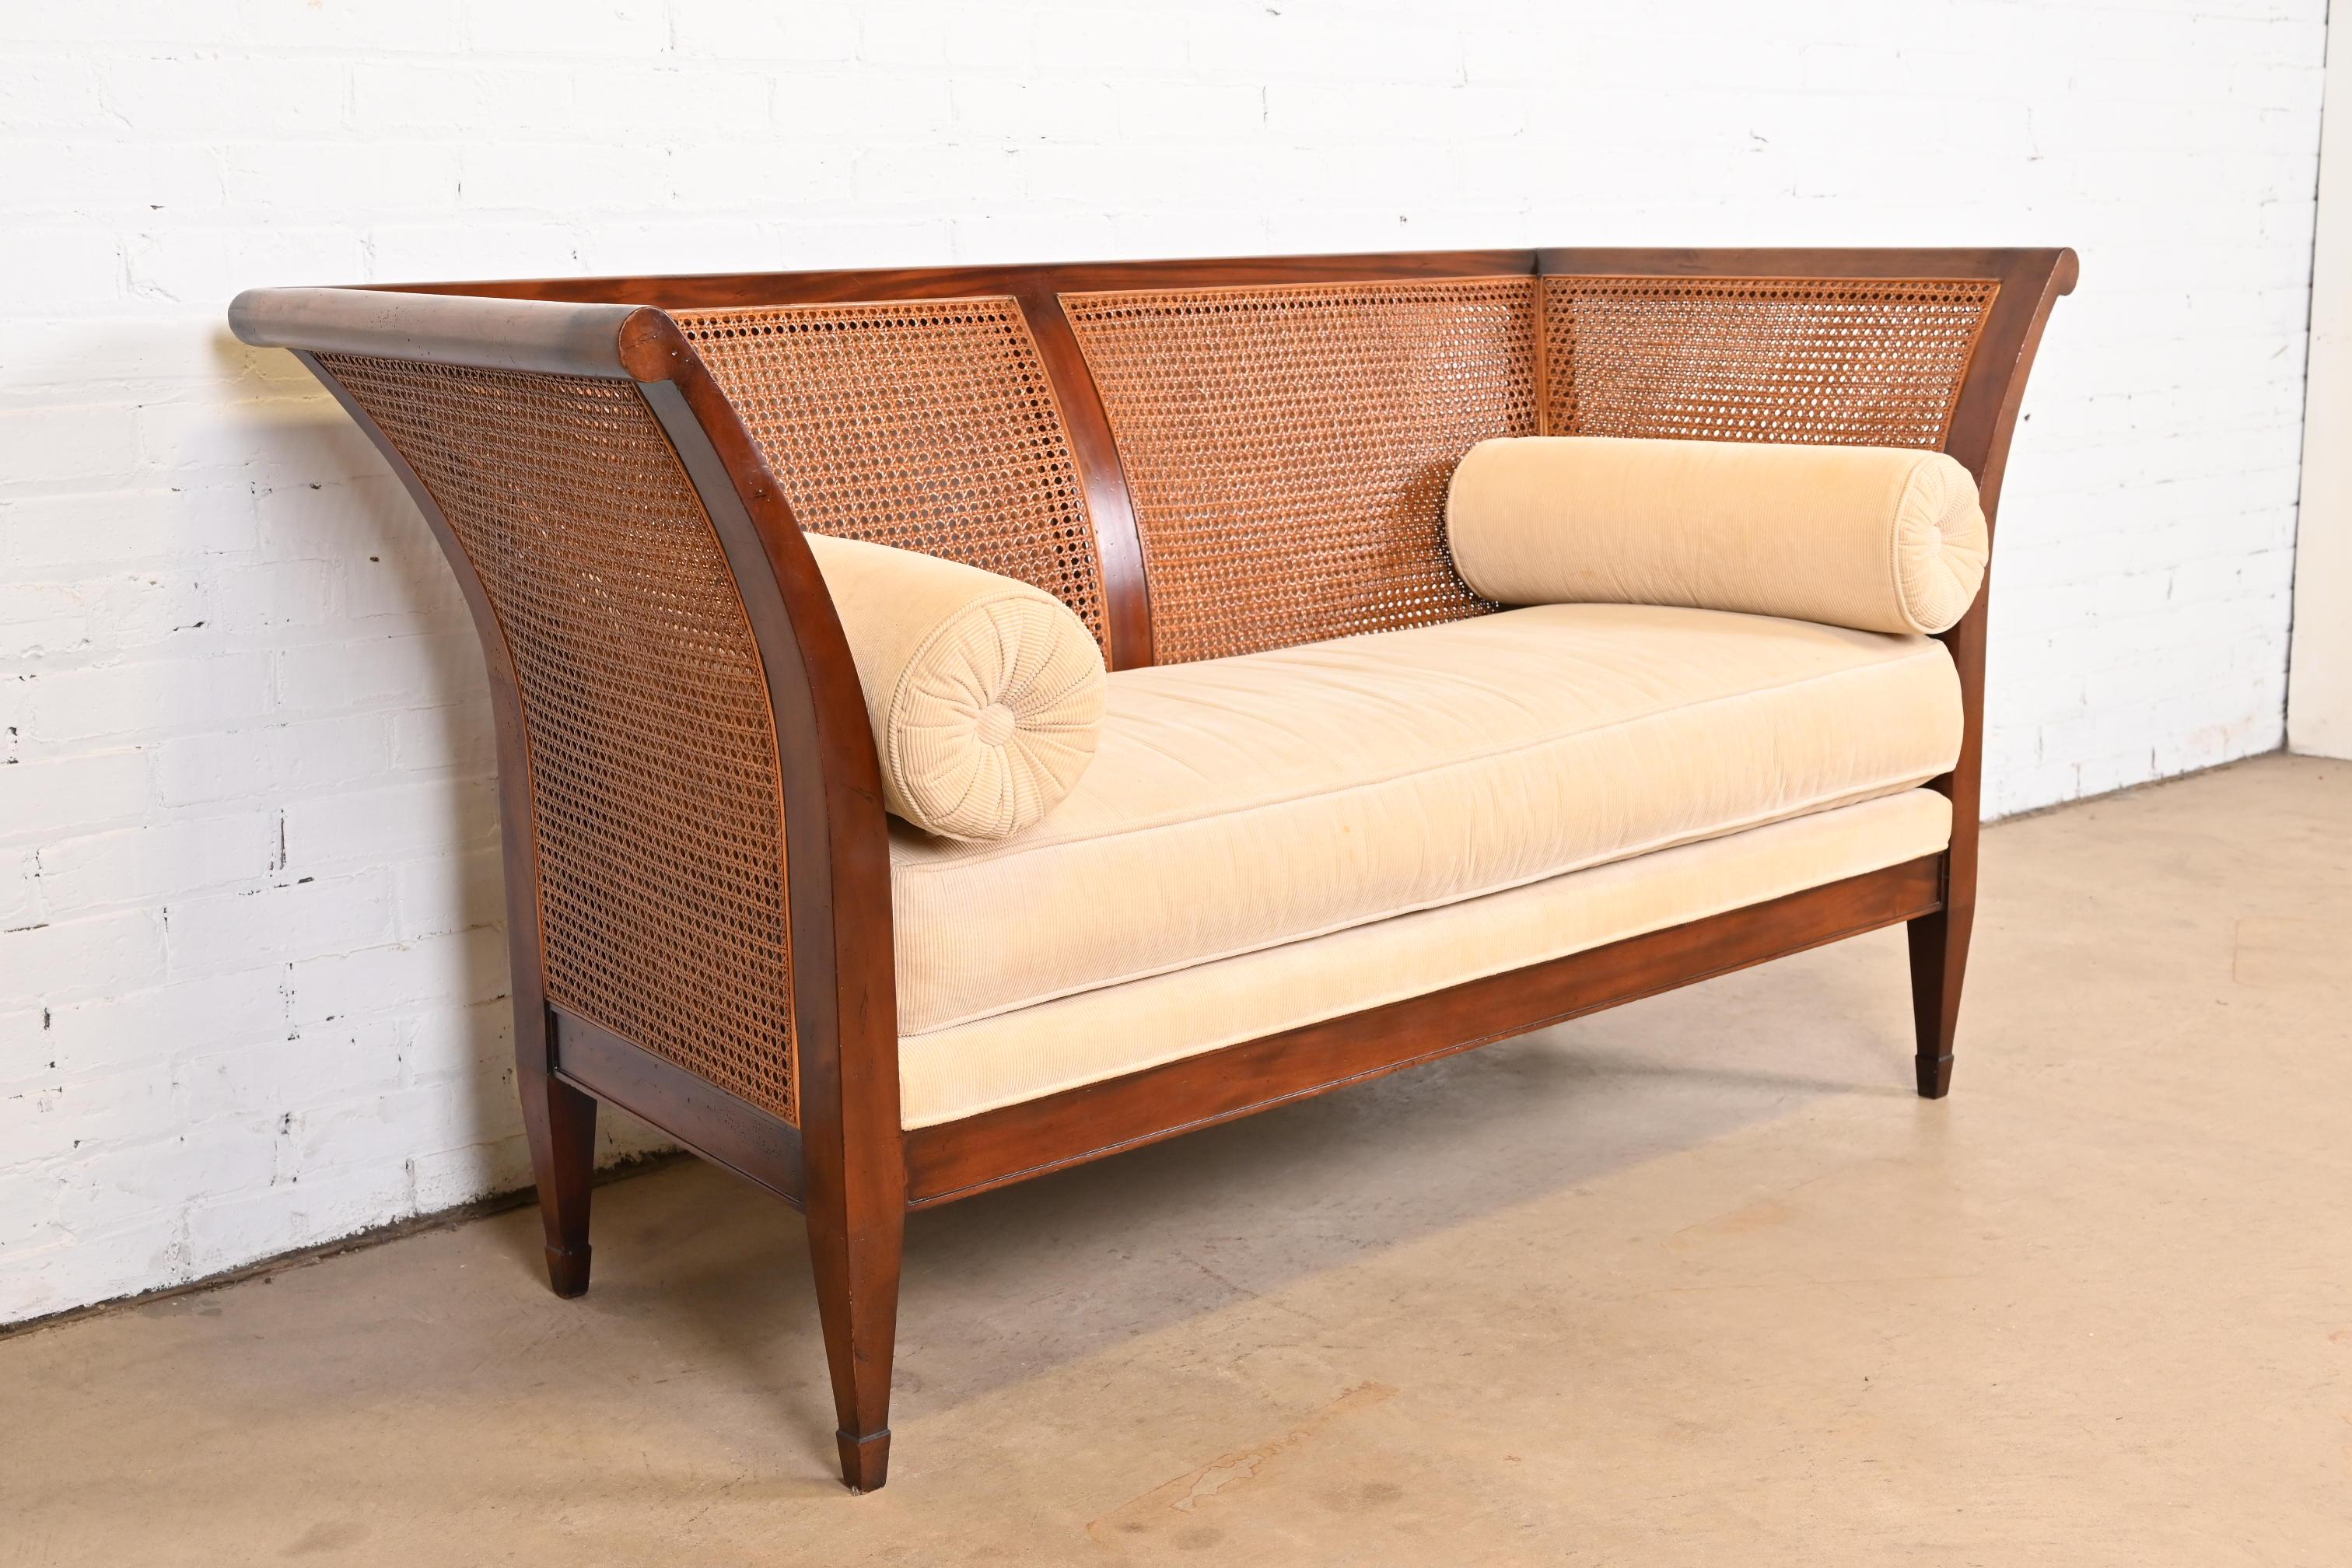 20th Century Baker Furniture Regency Mahogany and Cane Settee